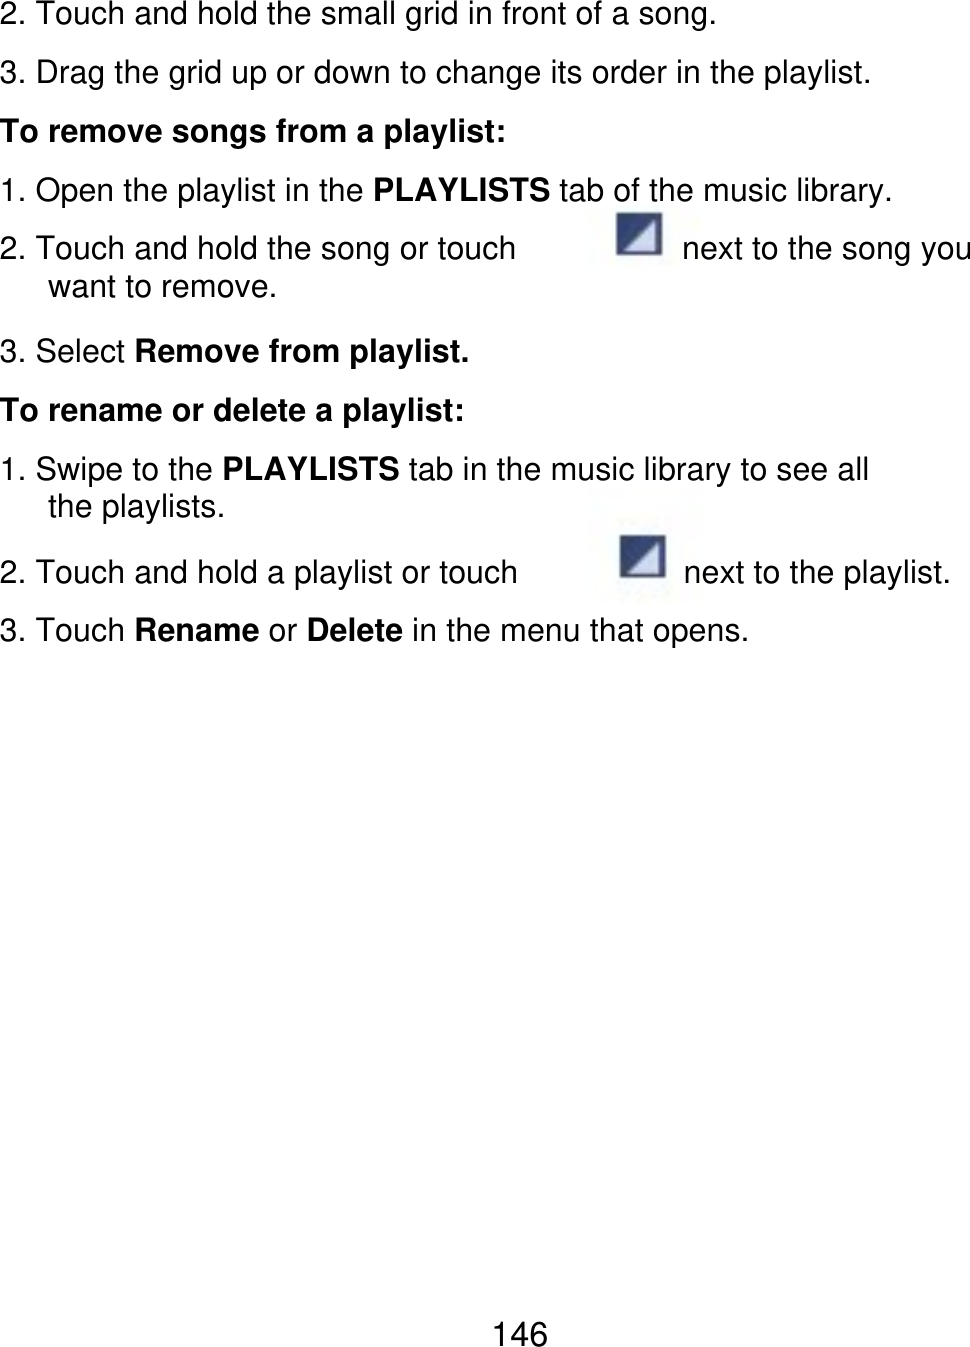 2. Touch and hold the small grid in front of a song. 3. Drag the grid up or down to change its order in the playlist. To remove songs from a playlist: 1. Open the playlist in the PLAYLISTS tab of the music library. 2. Touch and hold the song or touch    want to remove. 3. Select Remove from playlist. To rename or delete a playlist: 1. Swipe to the PLAYLISTS tab in the music library to see all    the playlists. 2. Touch and hold a playlist or touch next to the playlist. 3. Touch Rename or Delete in the menu that opens. next to the song you 146 